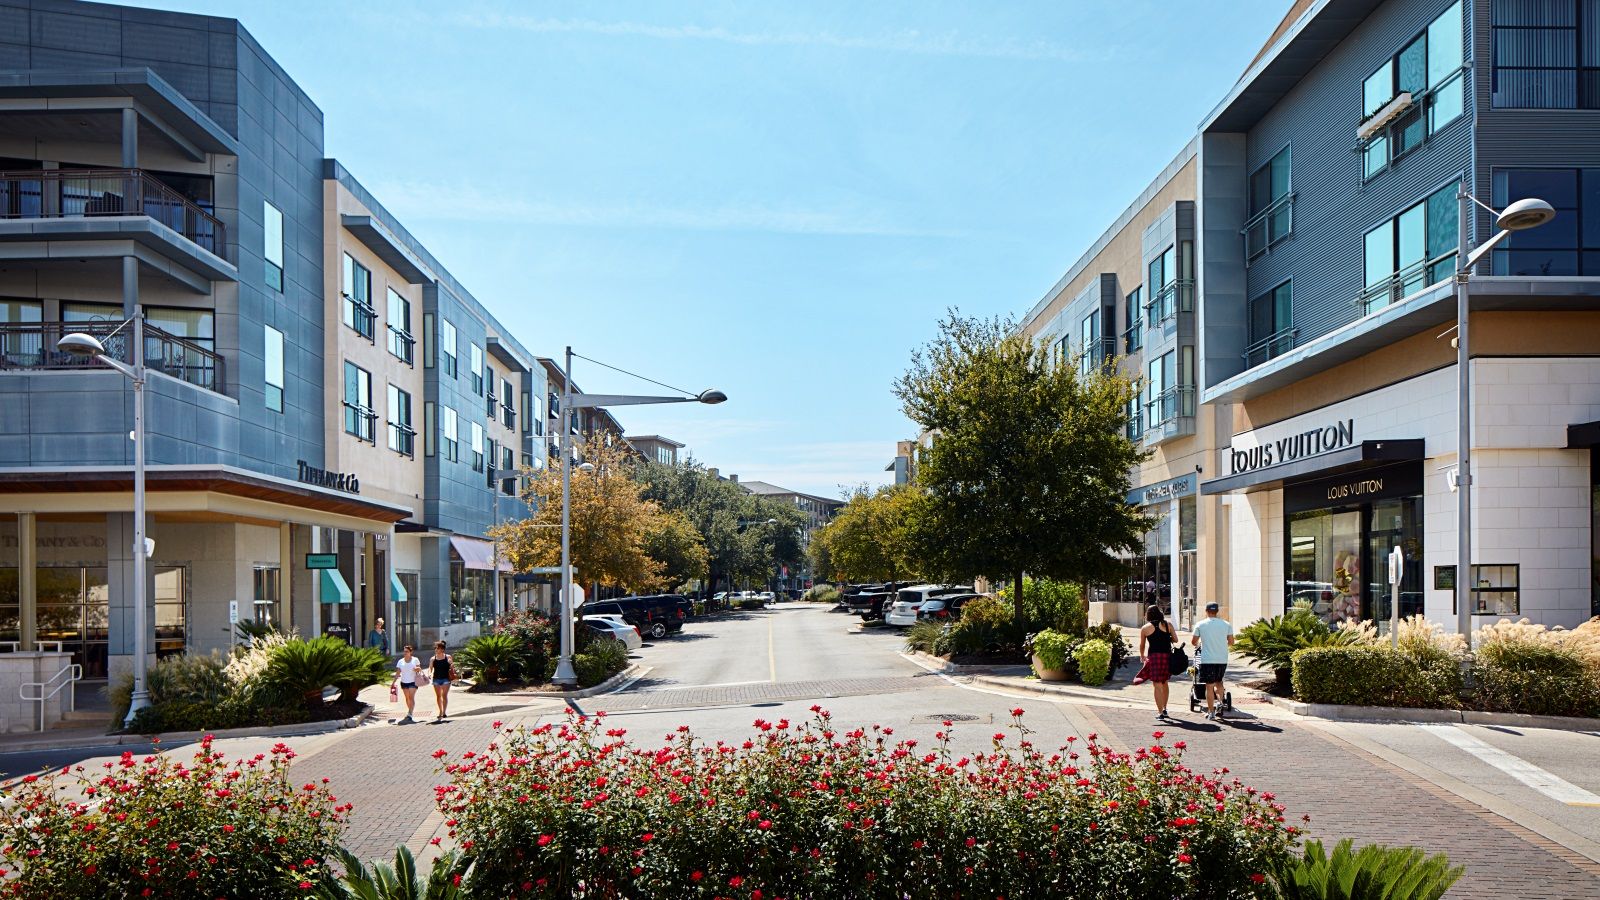 The Domain, Austin’s much-hyped “second downtown.” (Credit: [Austin Towers](https://austin.towers.net/heres-what-we-learned-from-our-fabulous-austin-survey/))